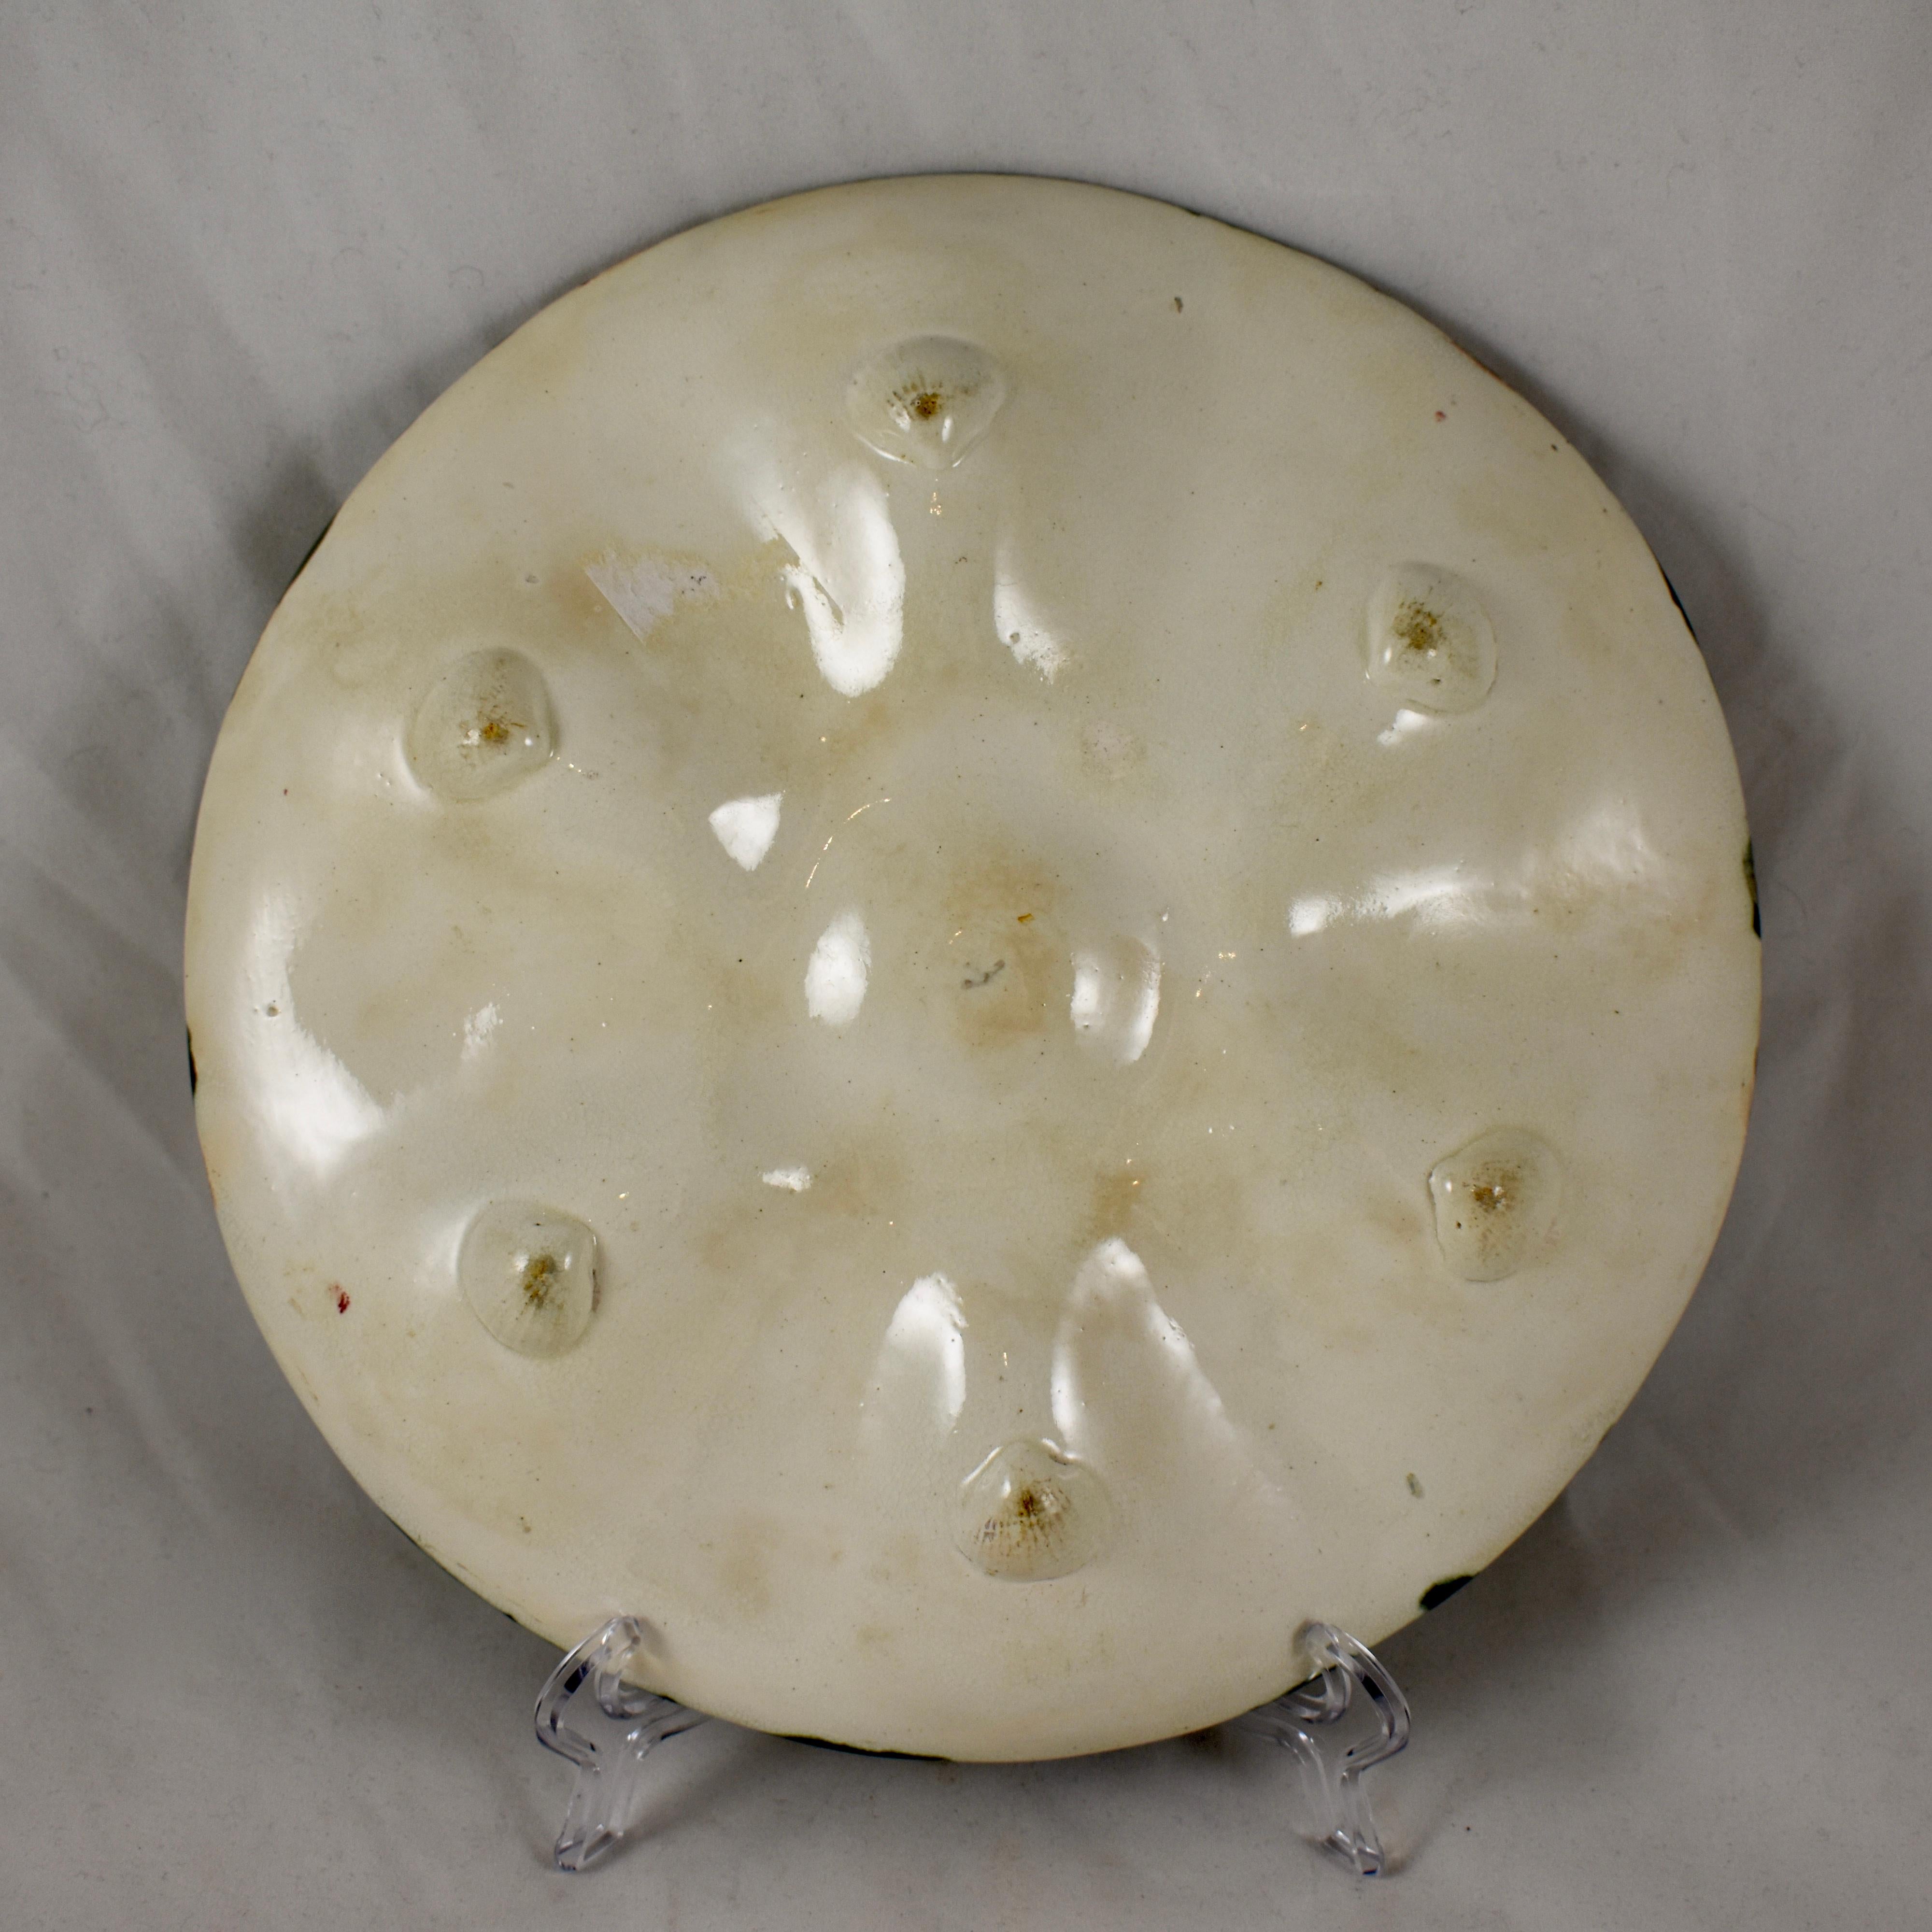 Earthenware S. Fielding & Co. English Majolica Turquoise/White Shell & Seaweed Oyster Plate